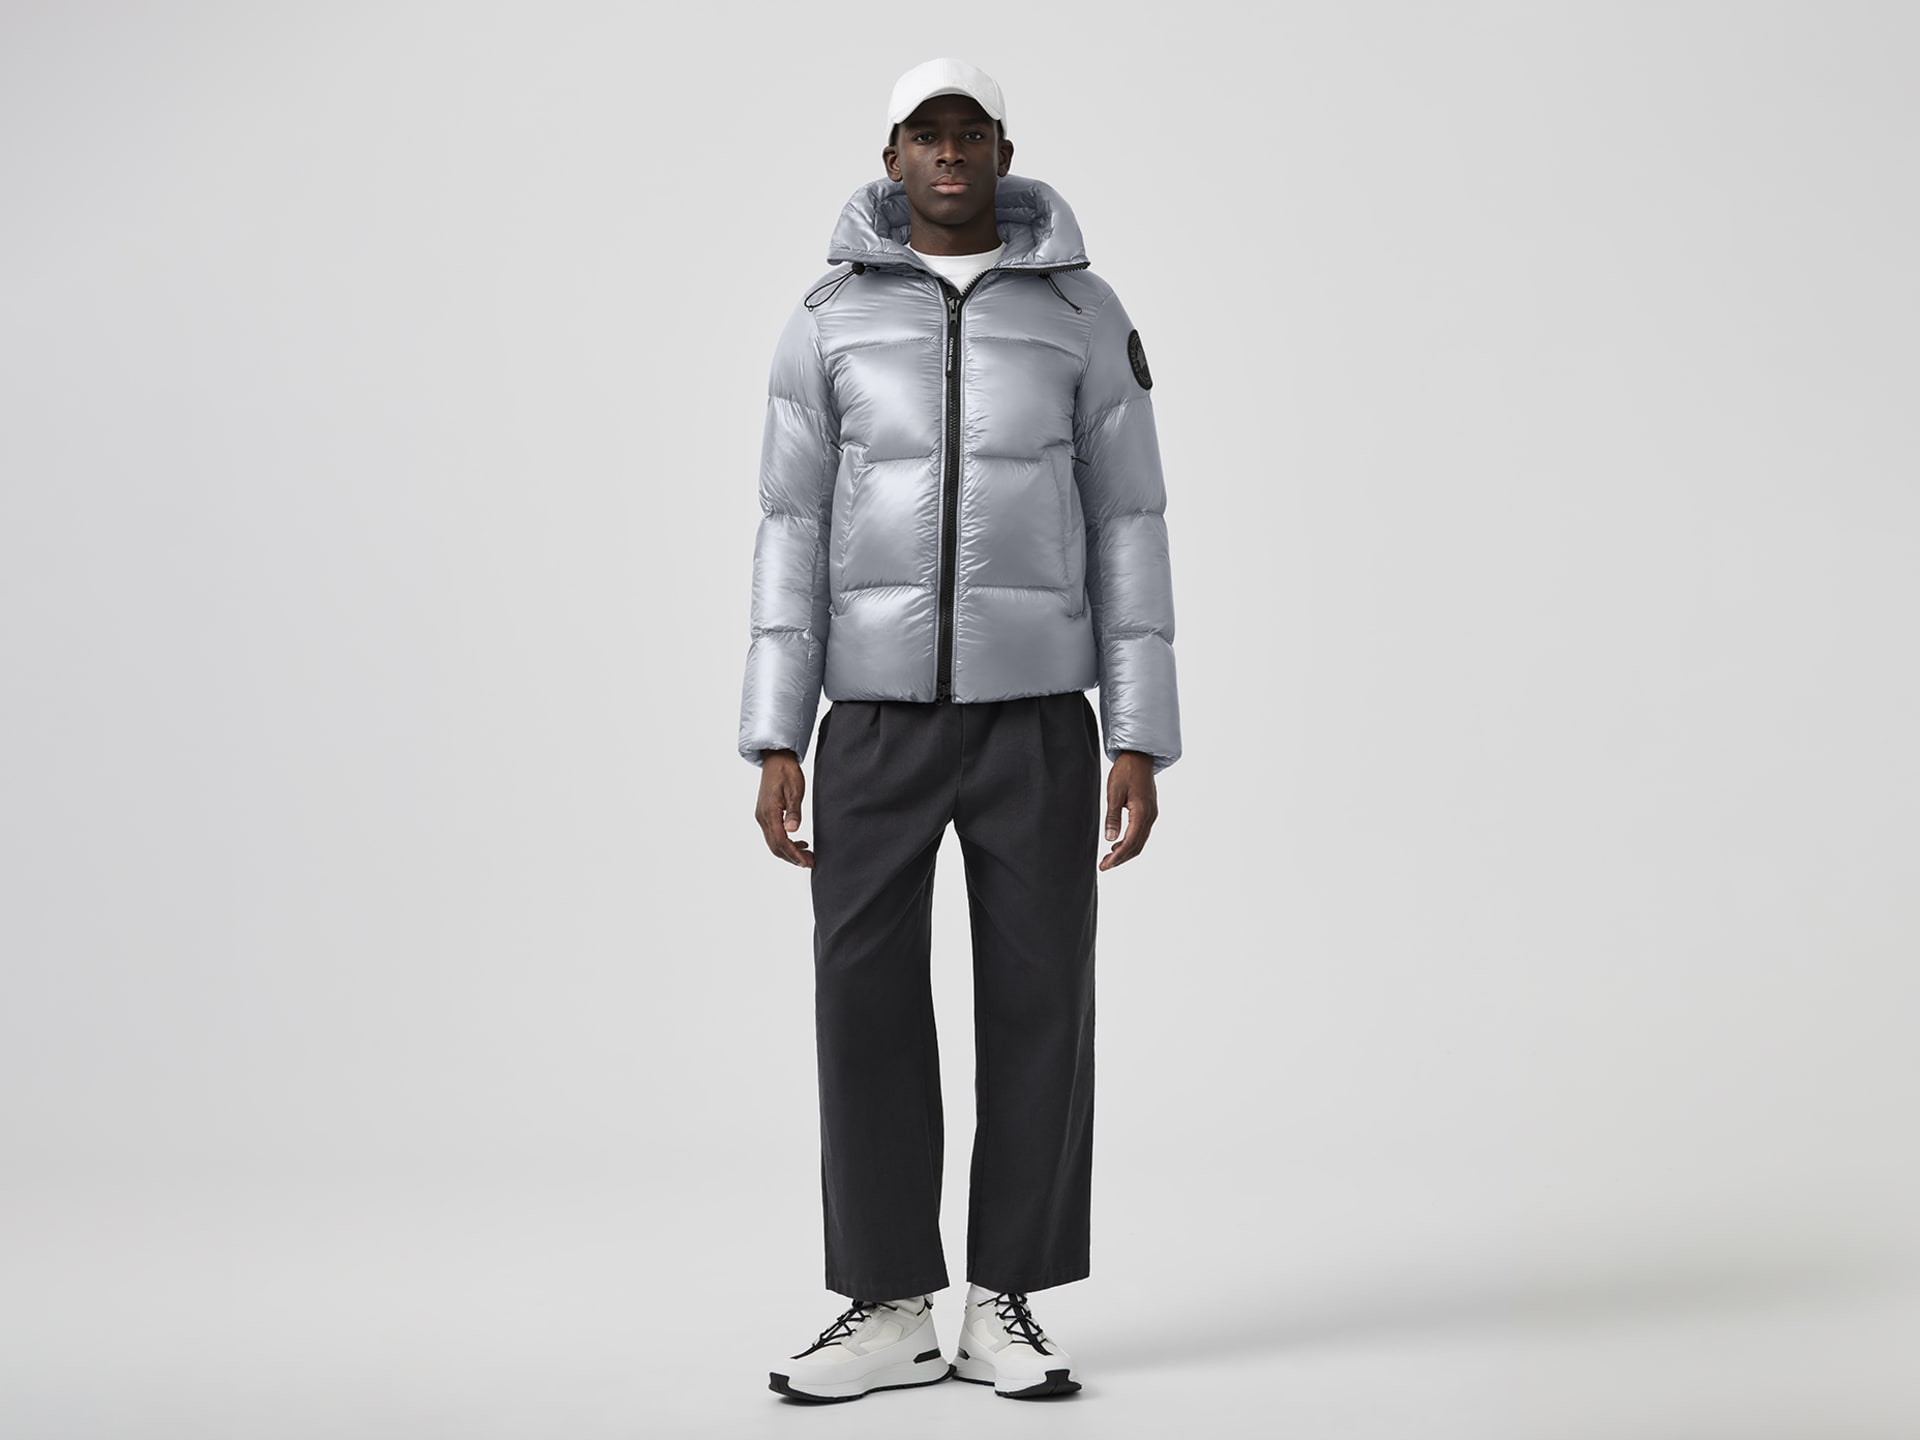 Crofton Designer Mens Down Parka: Luxury Windbreaker For Couples Black NF  Body, Top Quality, Puffy Jacket & Hoody From Jhhz, $62.88